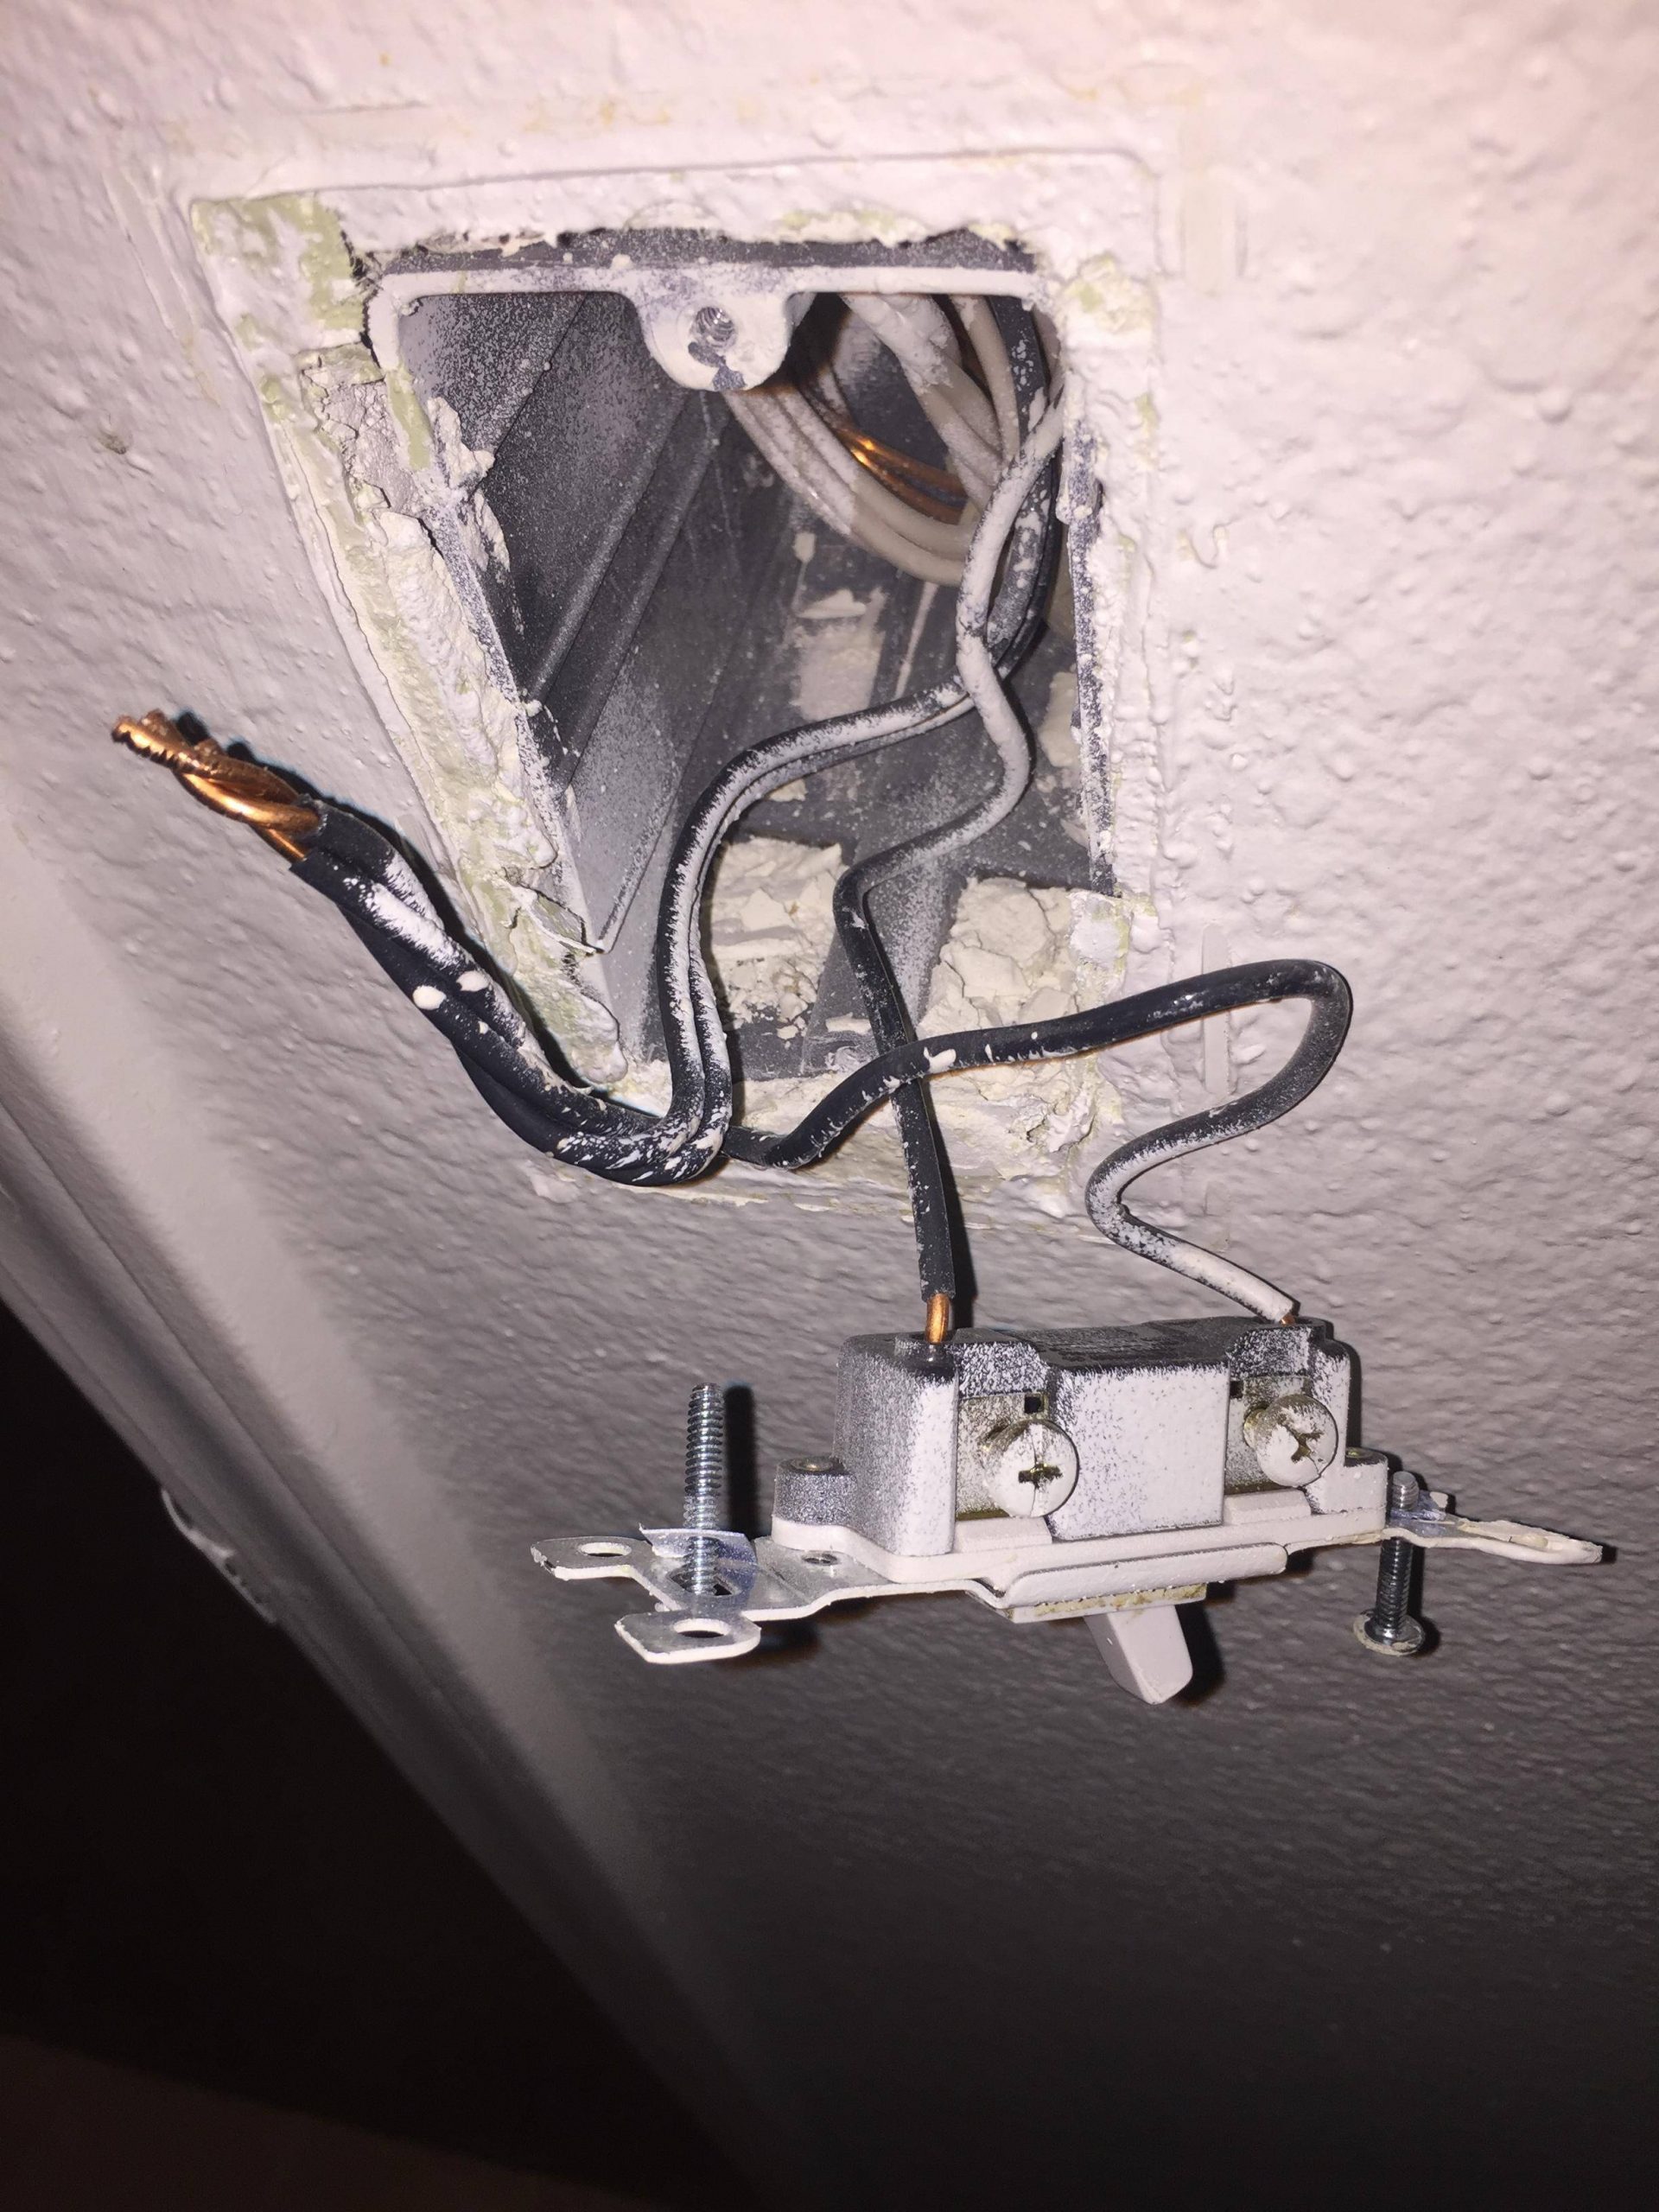 Replacement Wiring Fan And Light For Bathroom Twenty Two pertaining to size 2448 X 3264